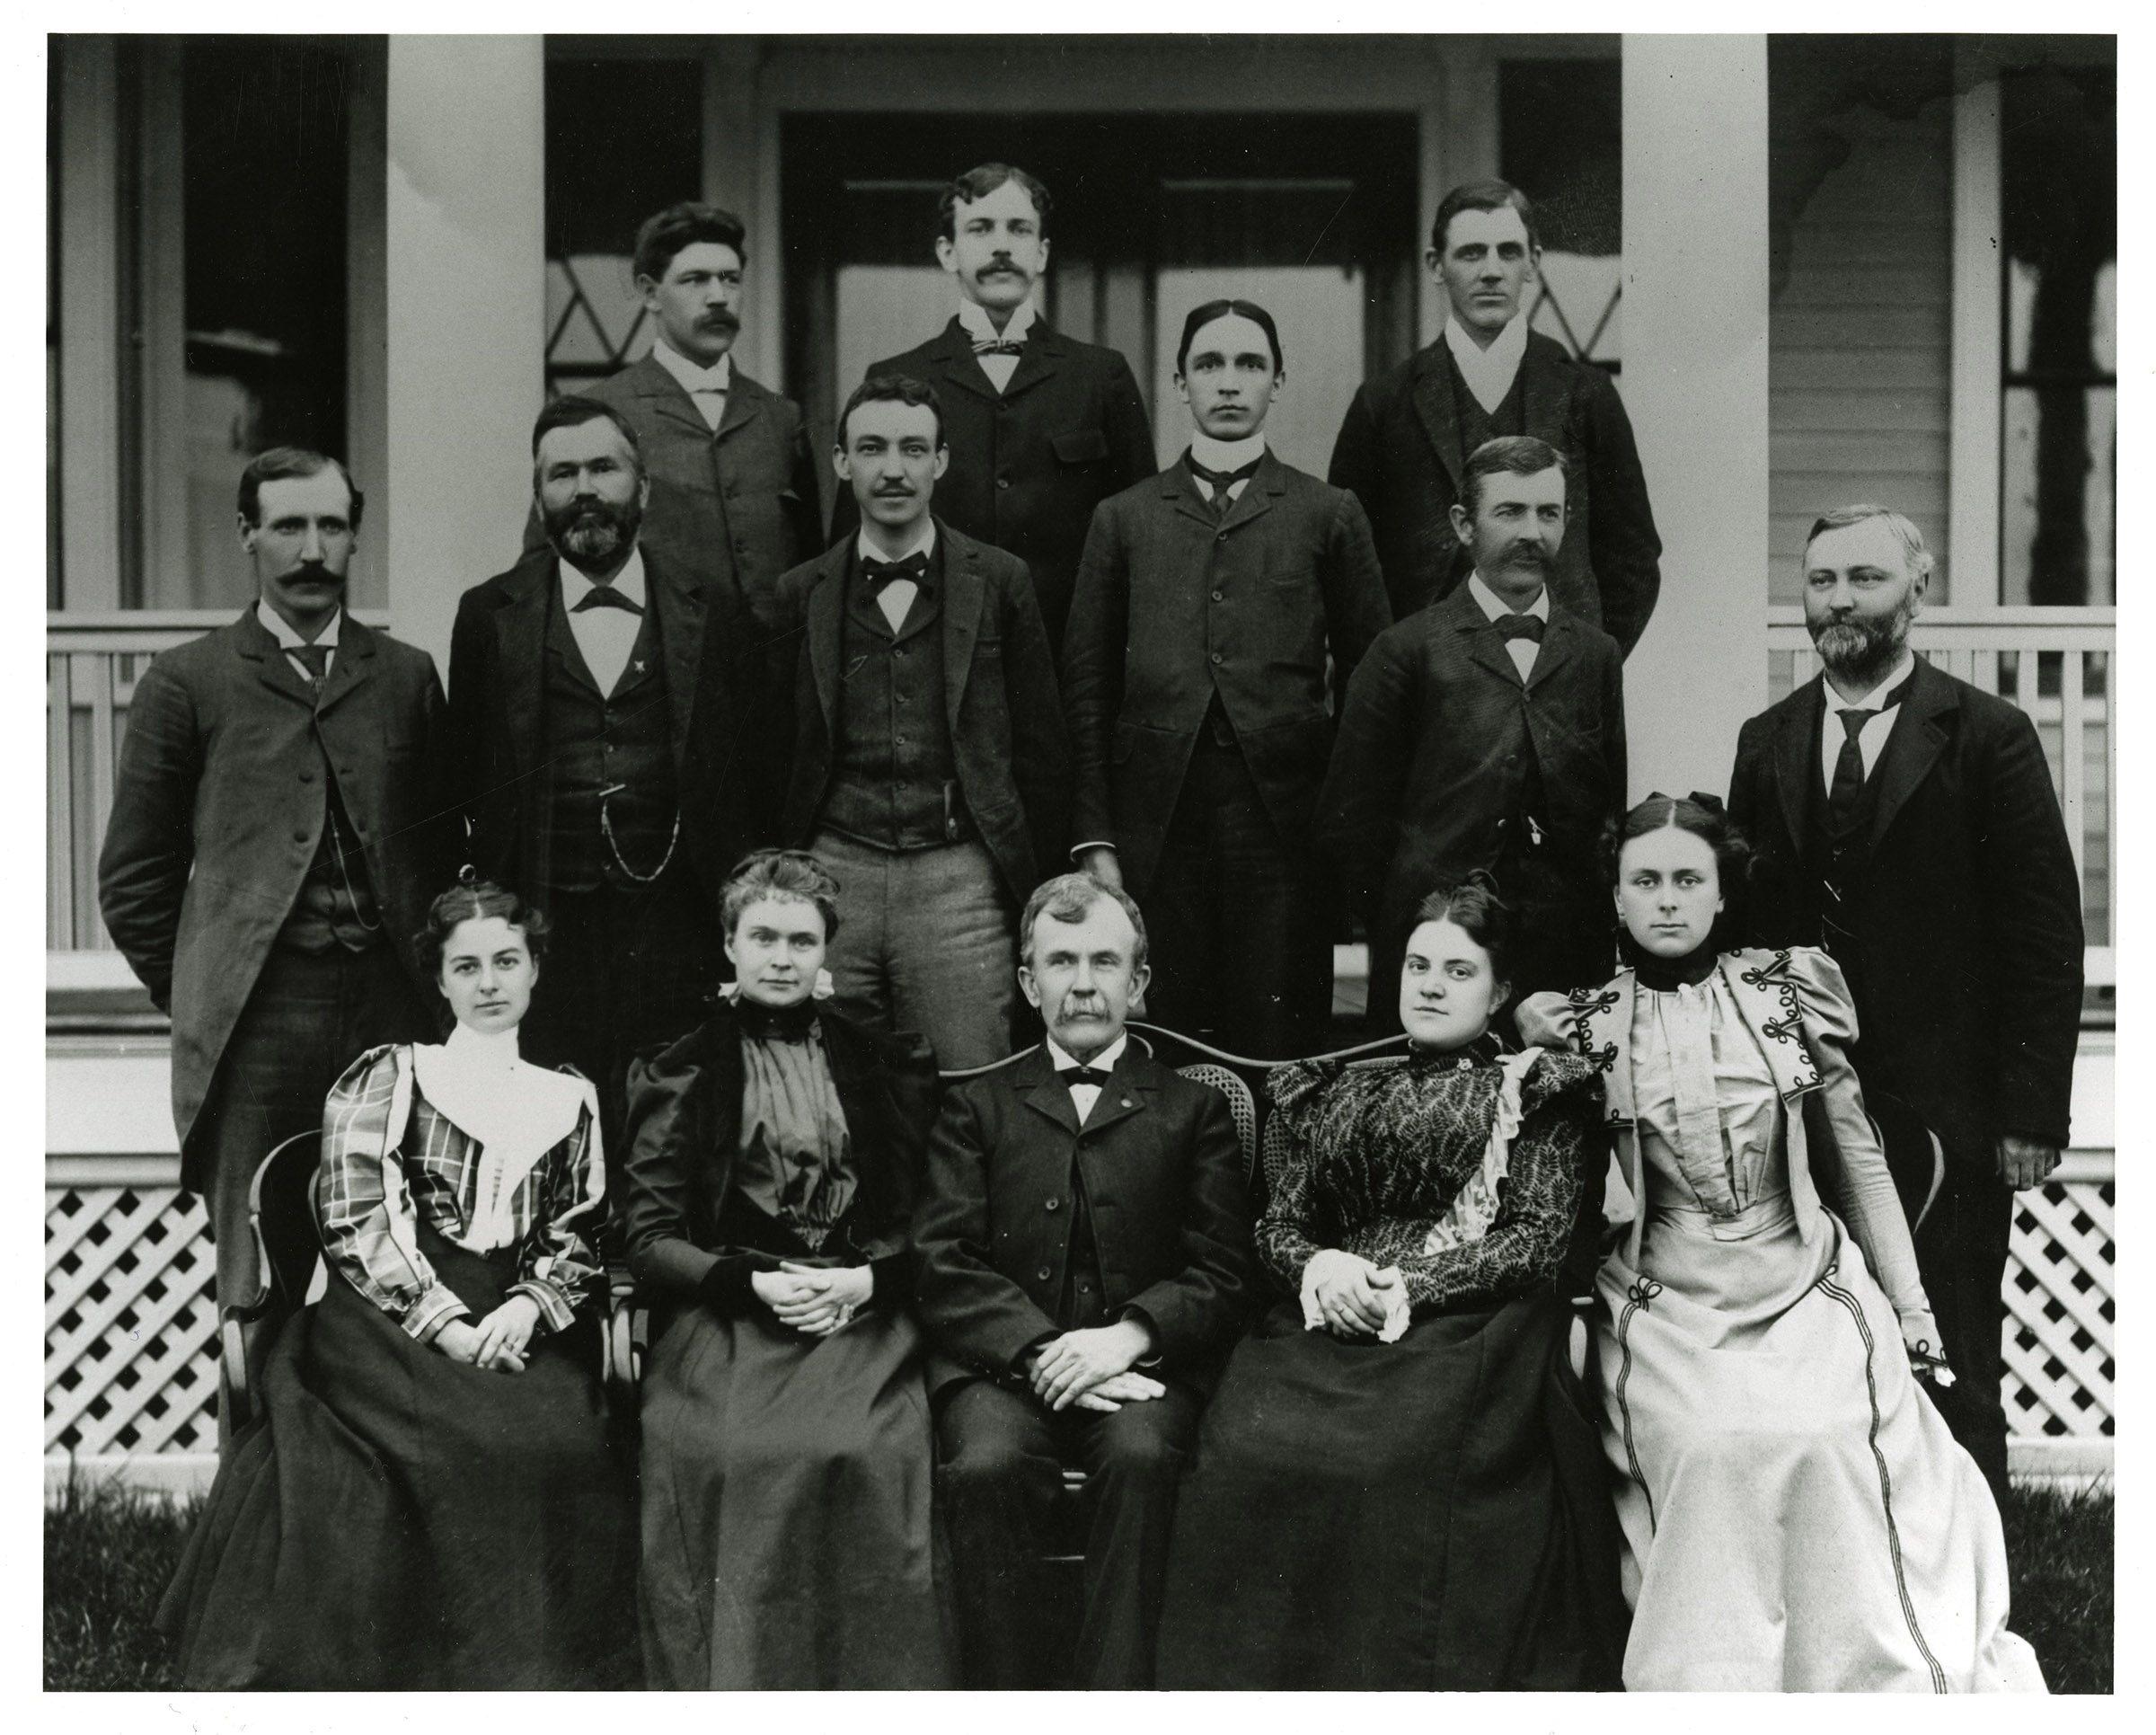 Faculty of the Storrs Agricultural College with President Benjamin Koons in the front row, 1898